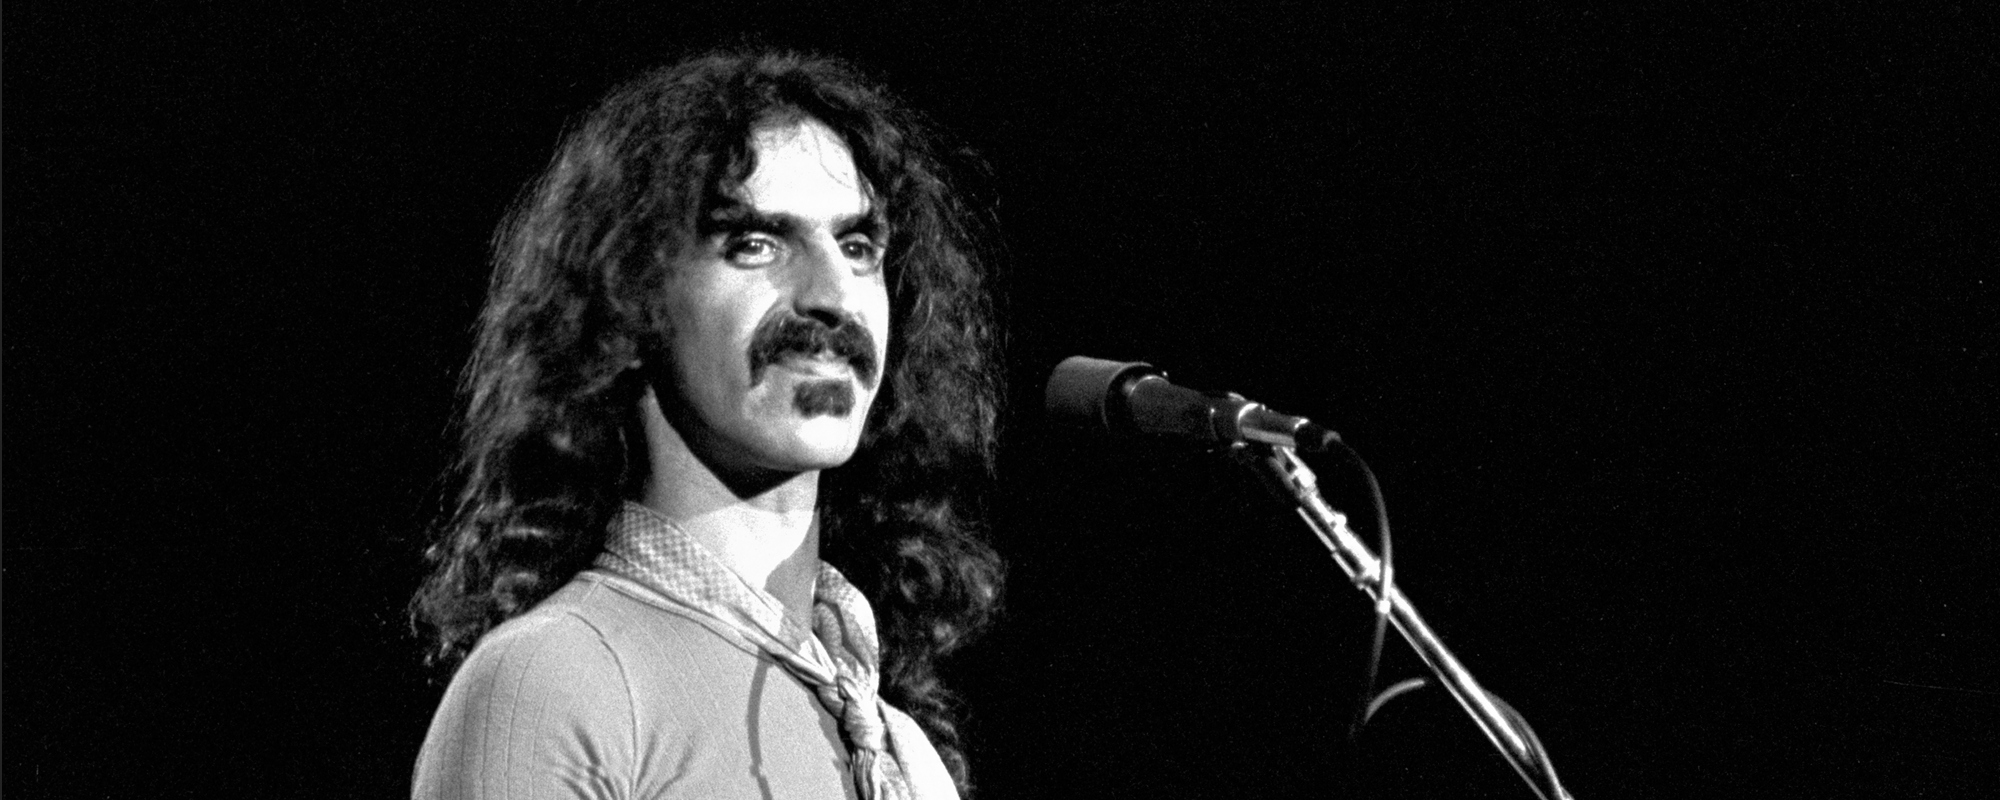 Frank Zappa’s ‘Over-Nite Sensation’ Turns 50 with ‘Deluxe’ Release